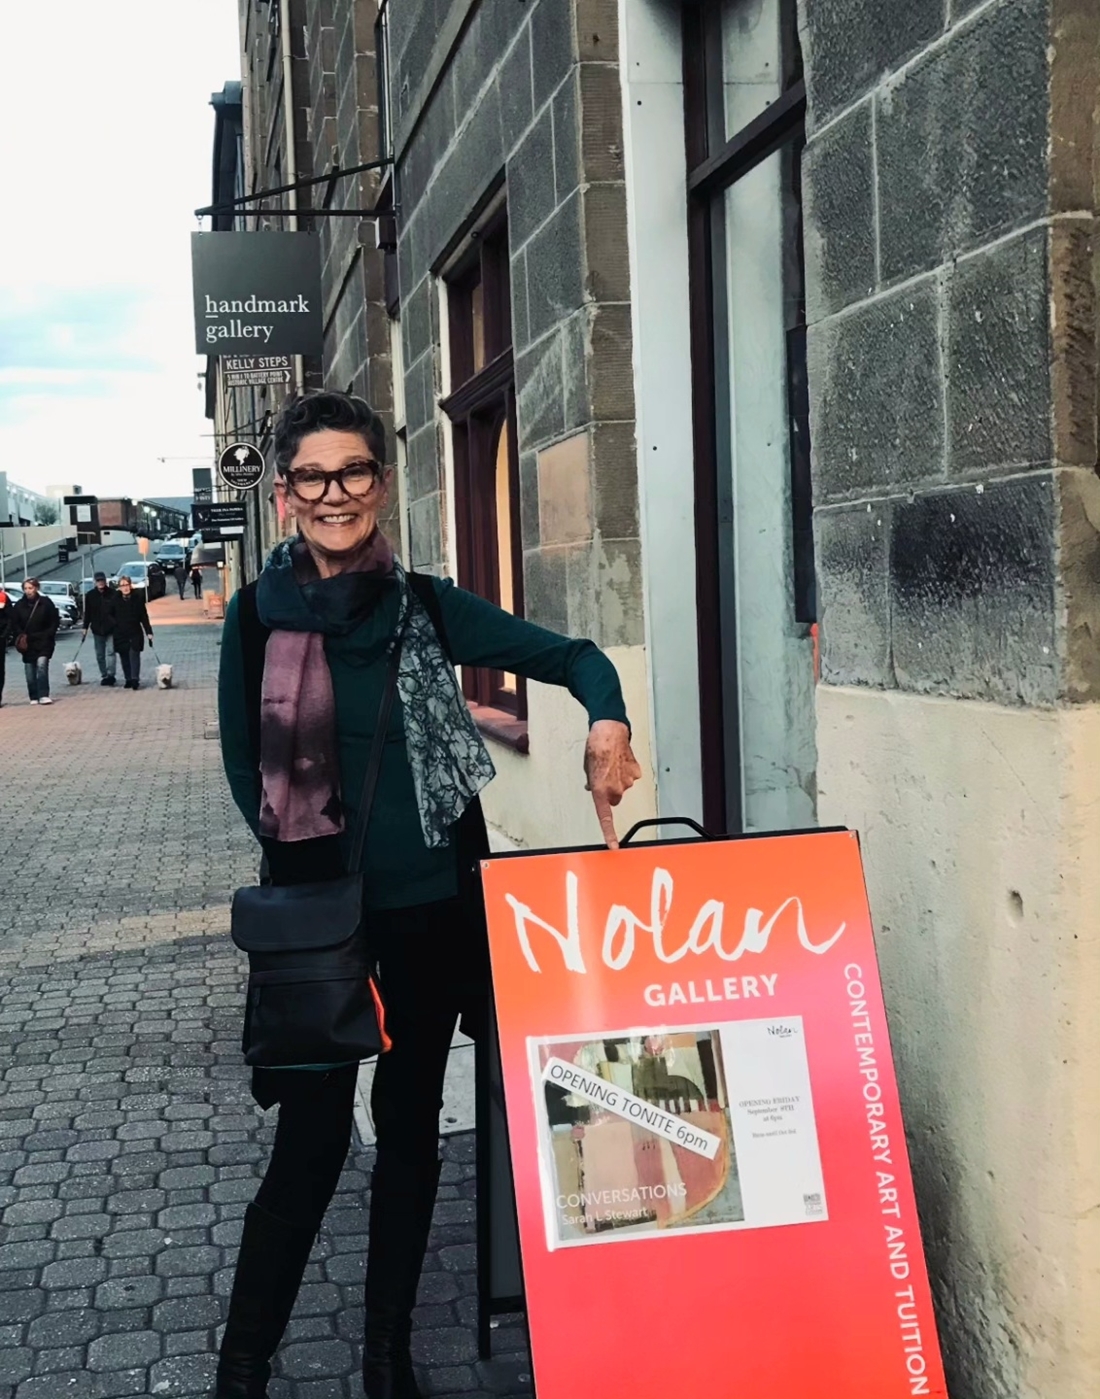 Image shows Bruny Island artist Sarah L Stewart outside the Nolan Gallery in Hobart for her solo exhibition in her Artist Profile Story for Art Trails Tasmania